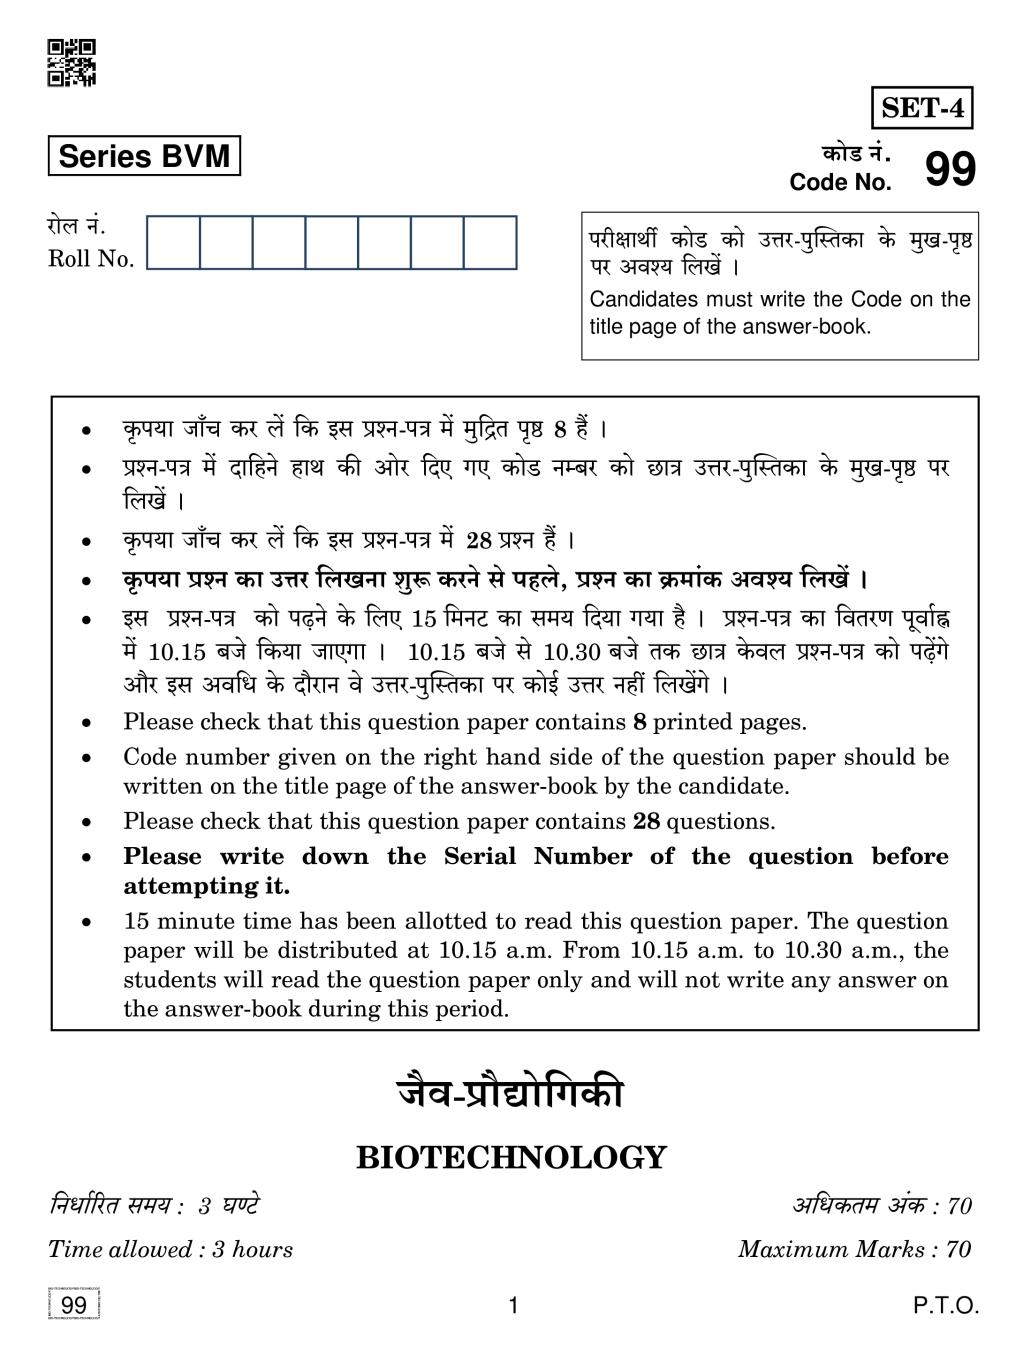 CBSE Class 12 Biotechnology Question Paper 2019 - Page 1